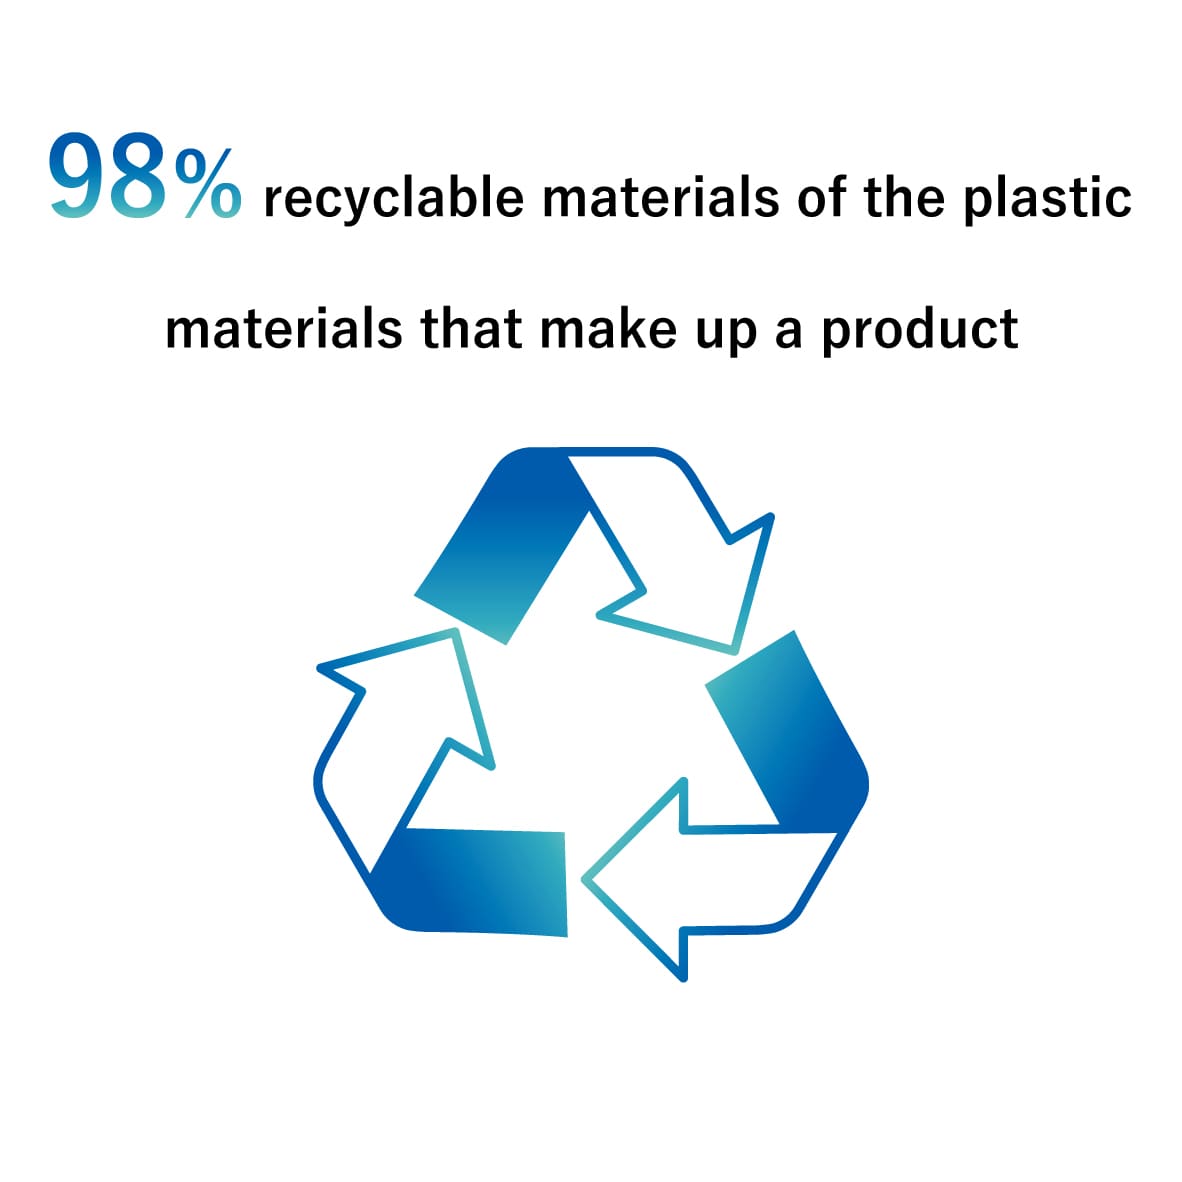 98% recyclable materials of the plastic materials that make up a product